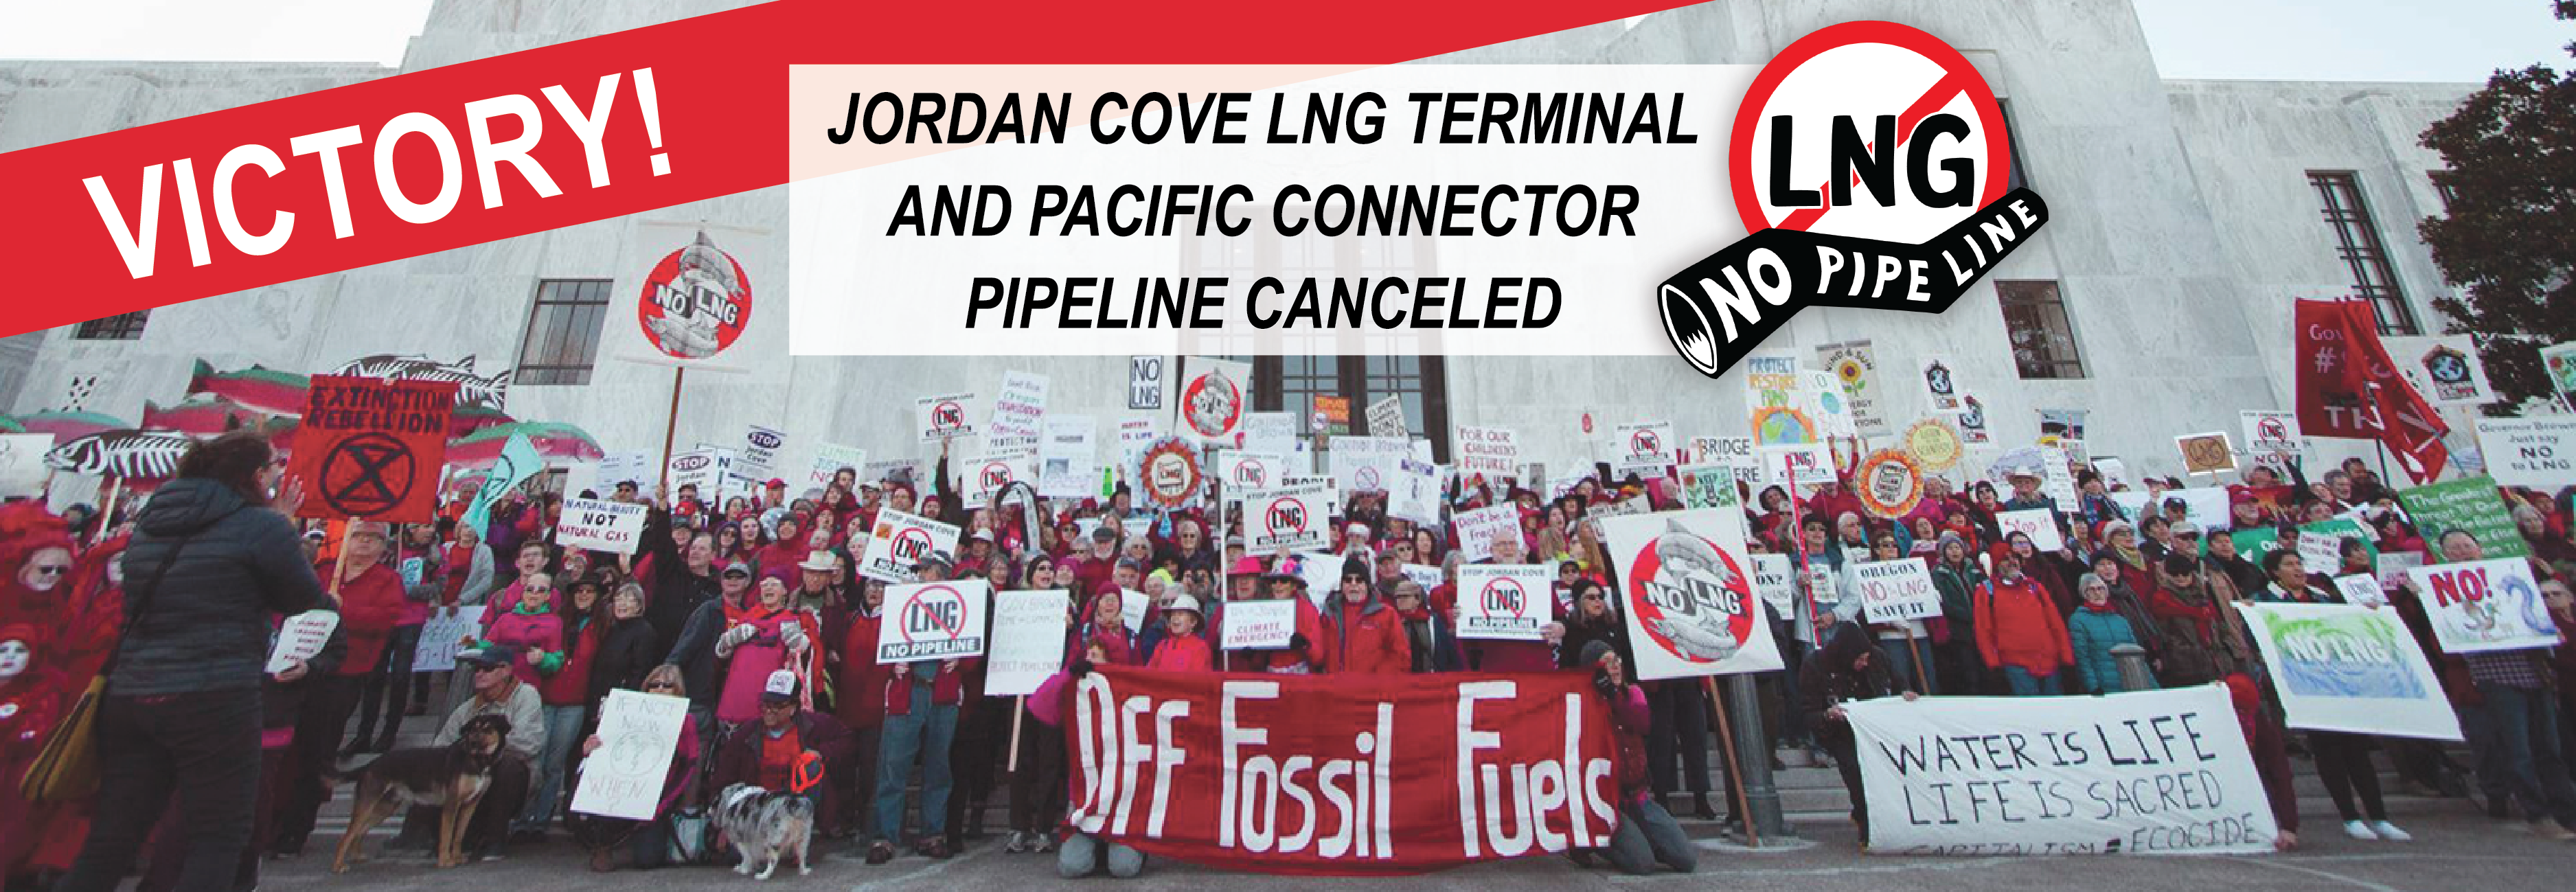 Victory! Jordan Cove Export Terminal and Pacific Connector Pipeline is Canceled!